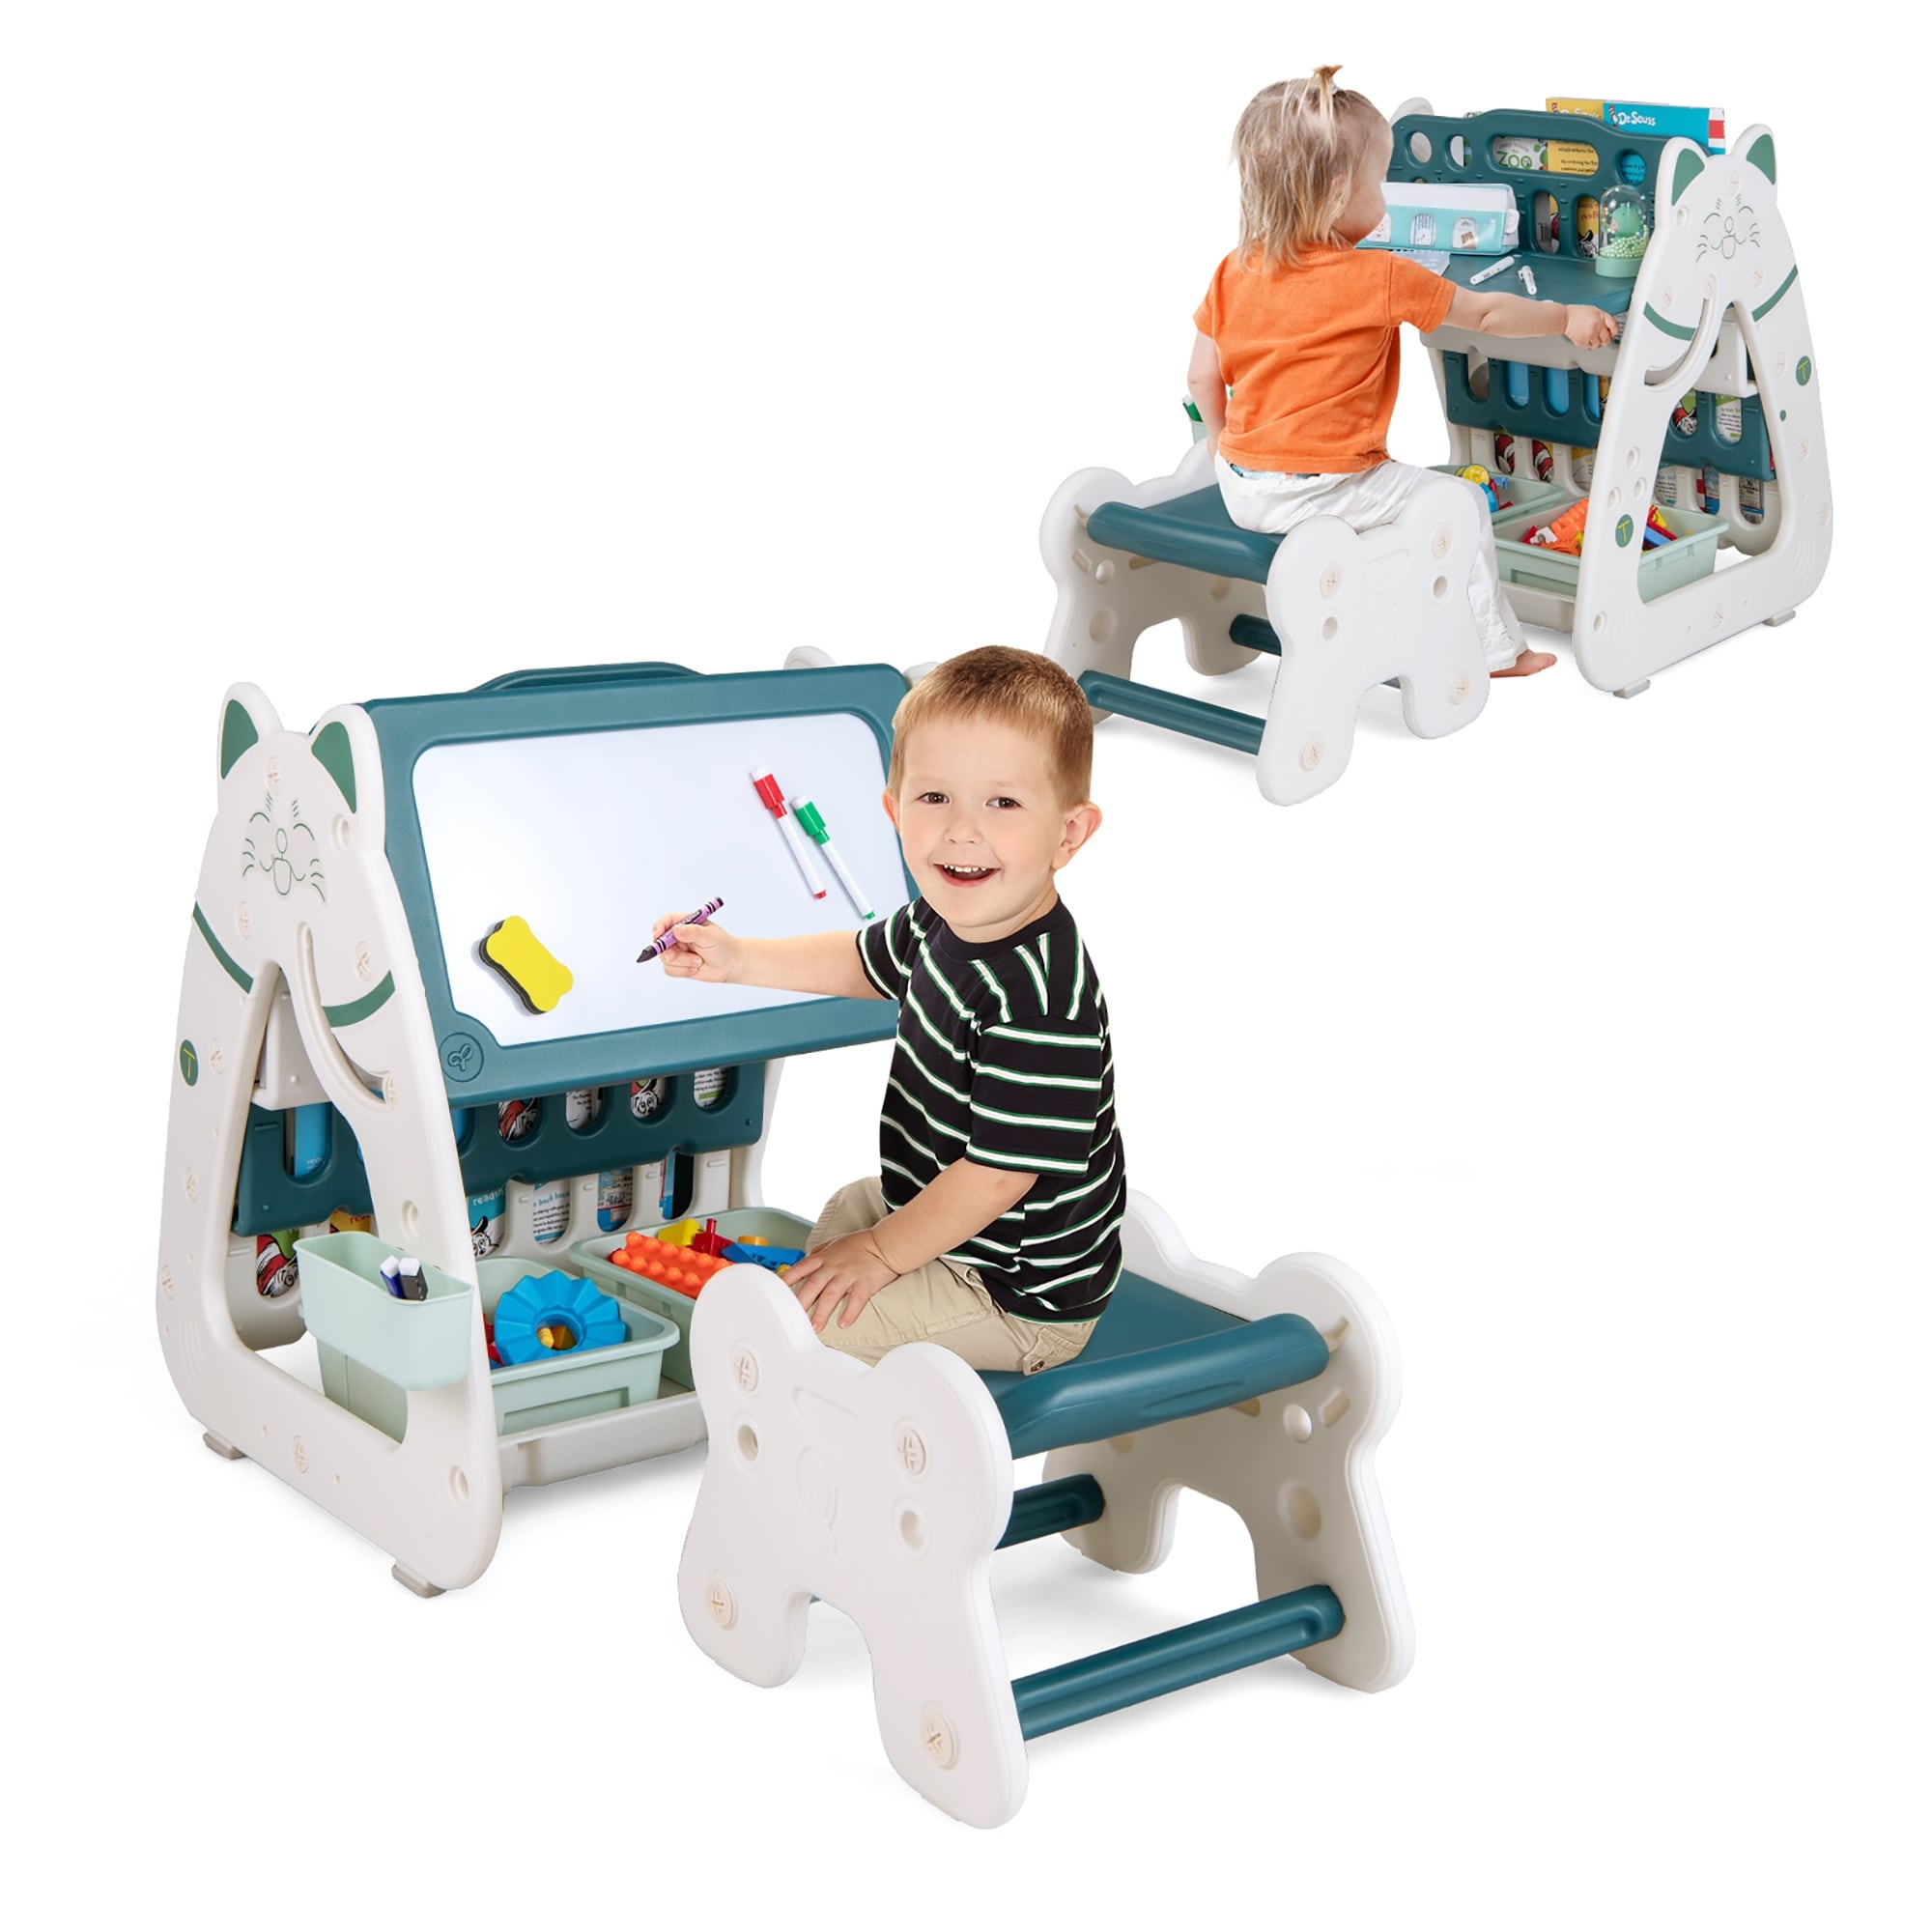 https://ak1.ostkcdn.com/images/products/is/images/direct/8a71c7d865fe0ef3c41b54c720cf05644dc27445/Costway-3-In-1-Kids-Art-Easel-with-Stool-Magnetic-Dry-Erase-Board-with.jpg